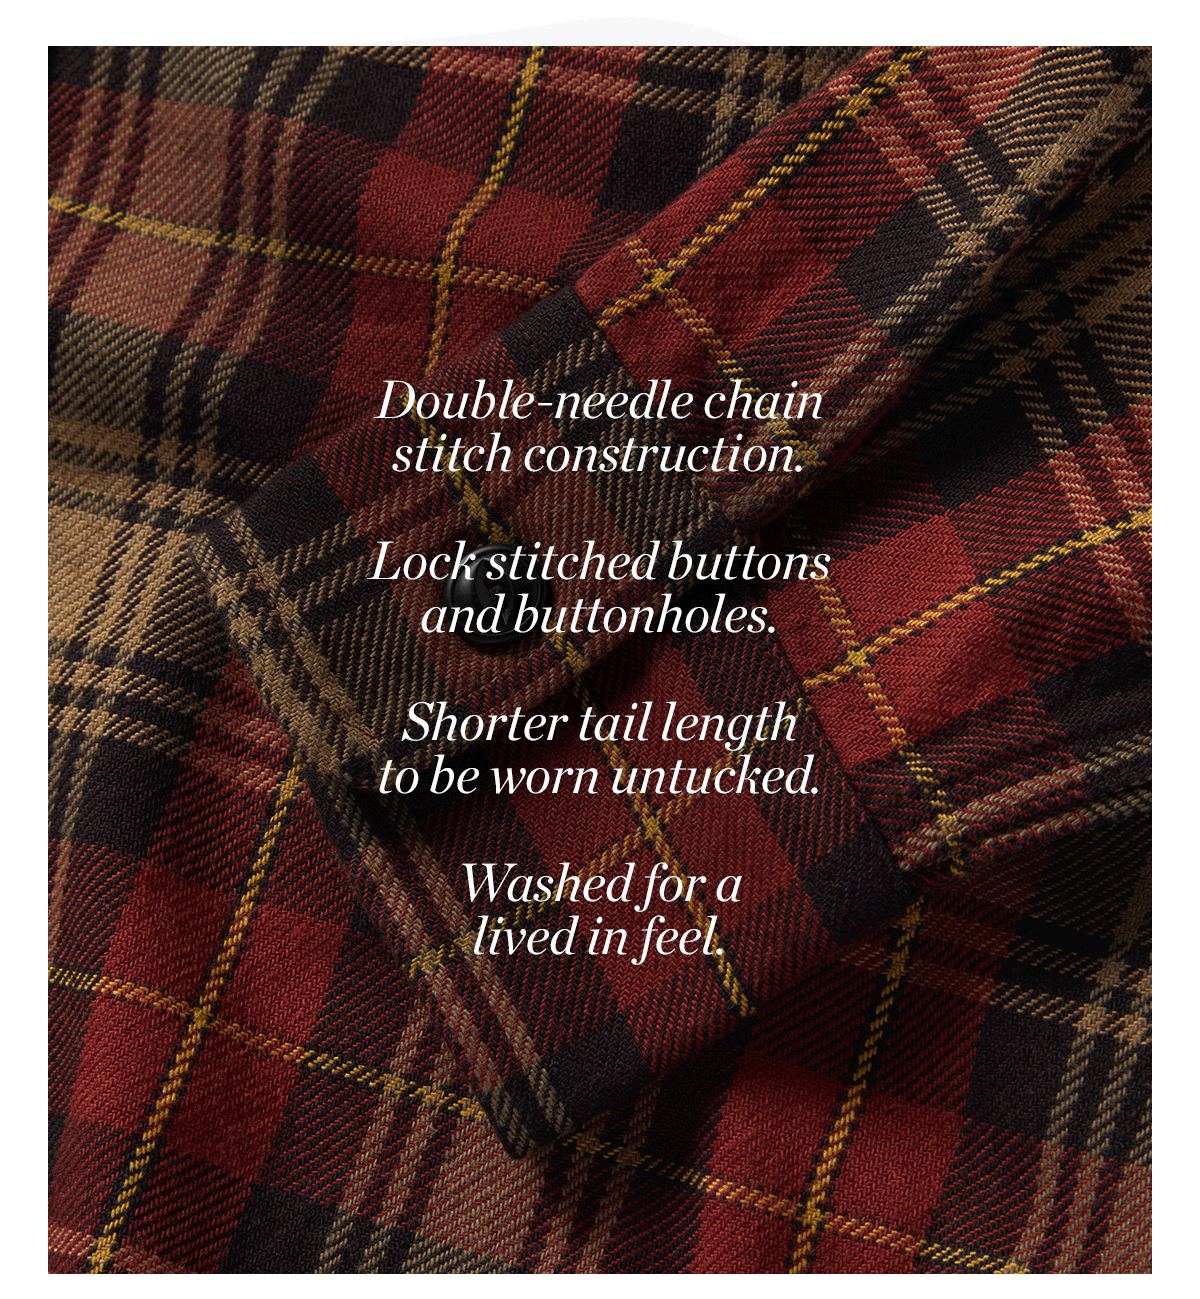 A True Workwear Flannel  Double-needle chain stitch construction. Lock stitched buttons and buttonholes. Shorter tail length to be worn untucked. Washed for a lived in feel.